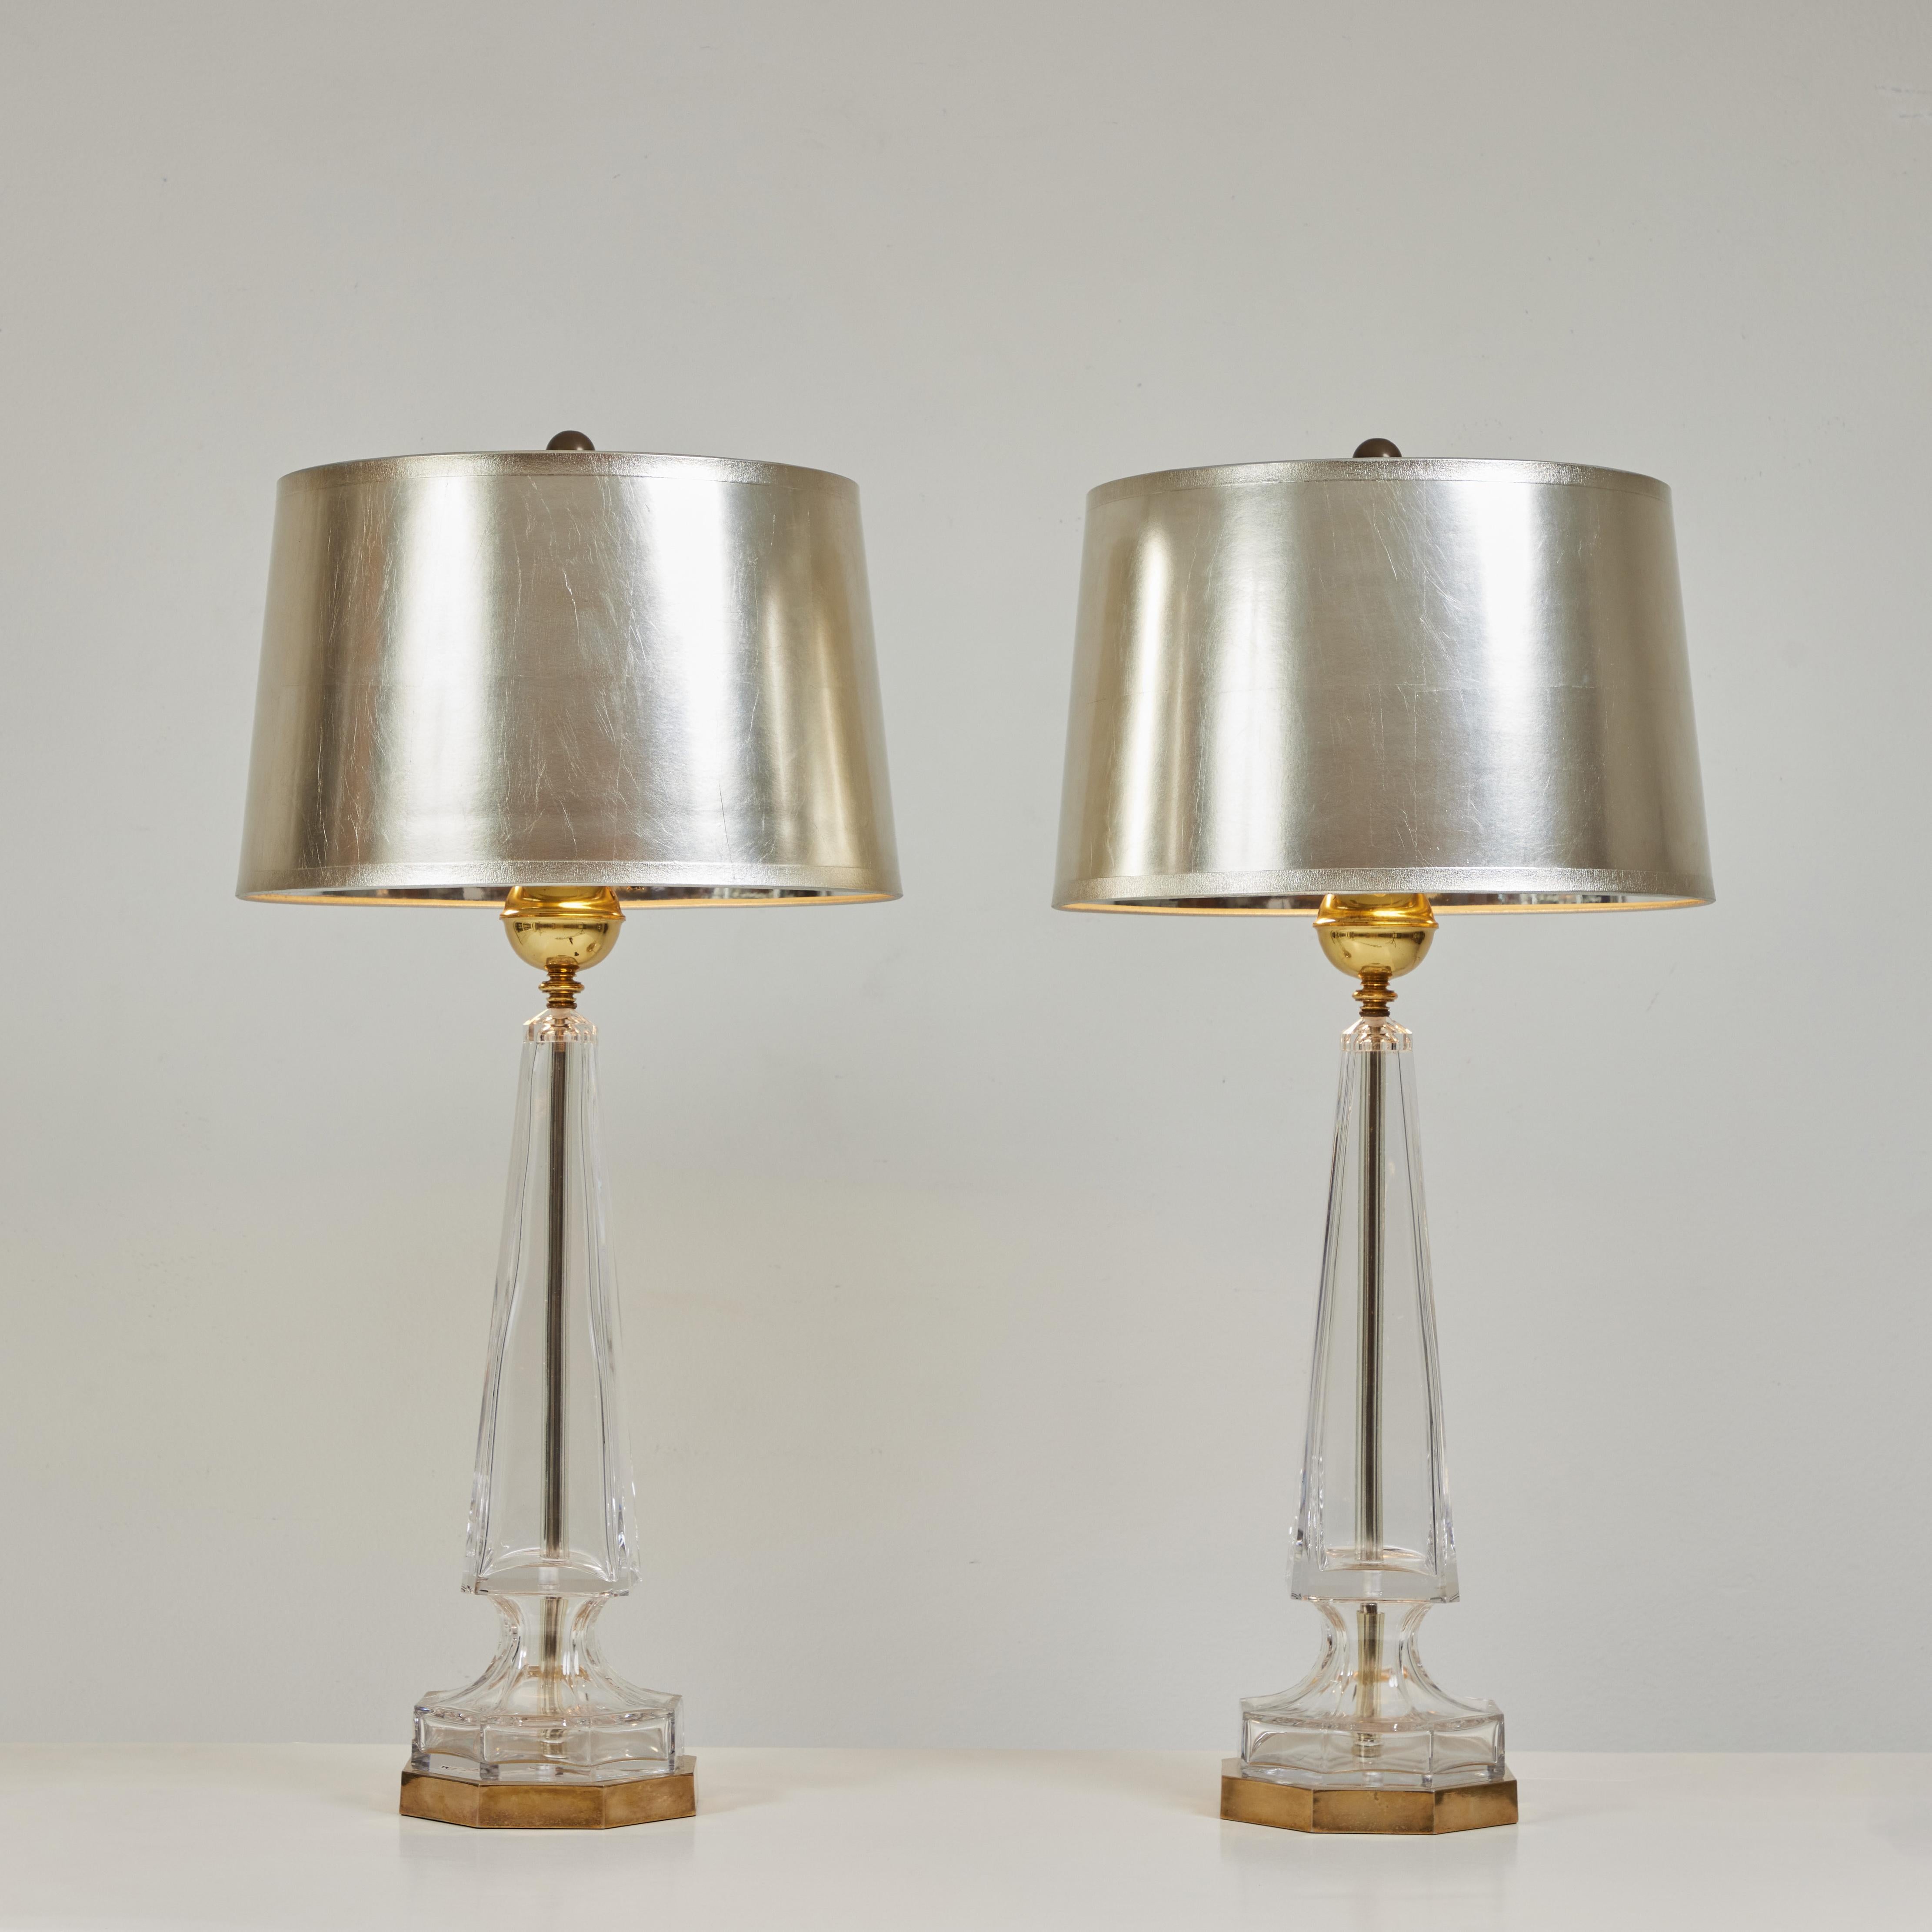 Great pair of moulded crystal lamps by Chapman Lamps, know for their quality product.  The crystal pieces sit on a metal base with a metal rod running up the center of the lamp.  At the top of the Obelisk of each lamp sits a polished and lacquered